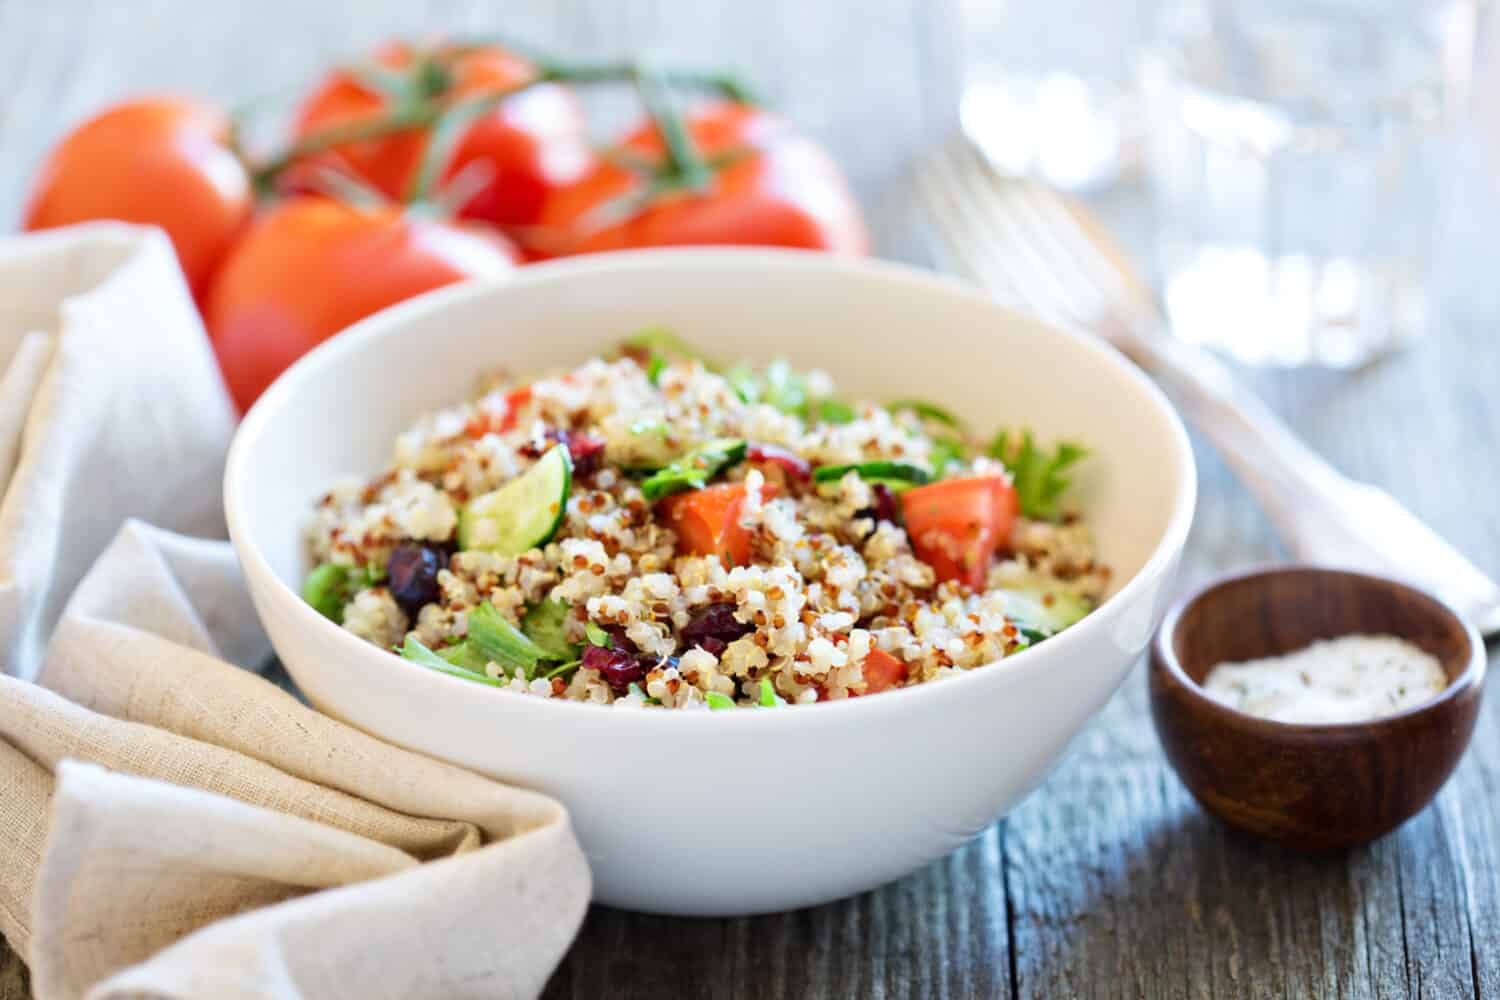 Quinoa salad; perfect for a summer lunch or light dinner.